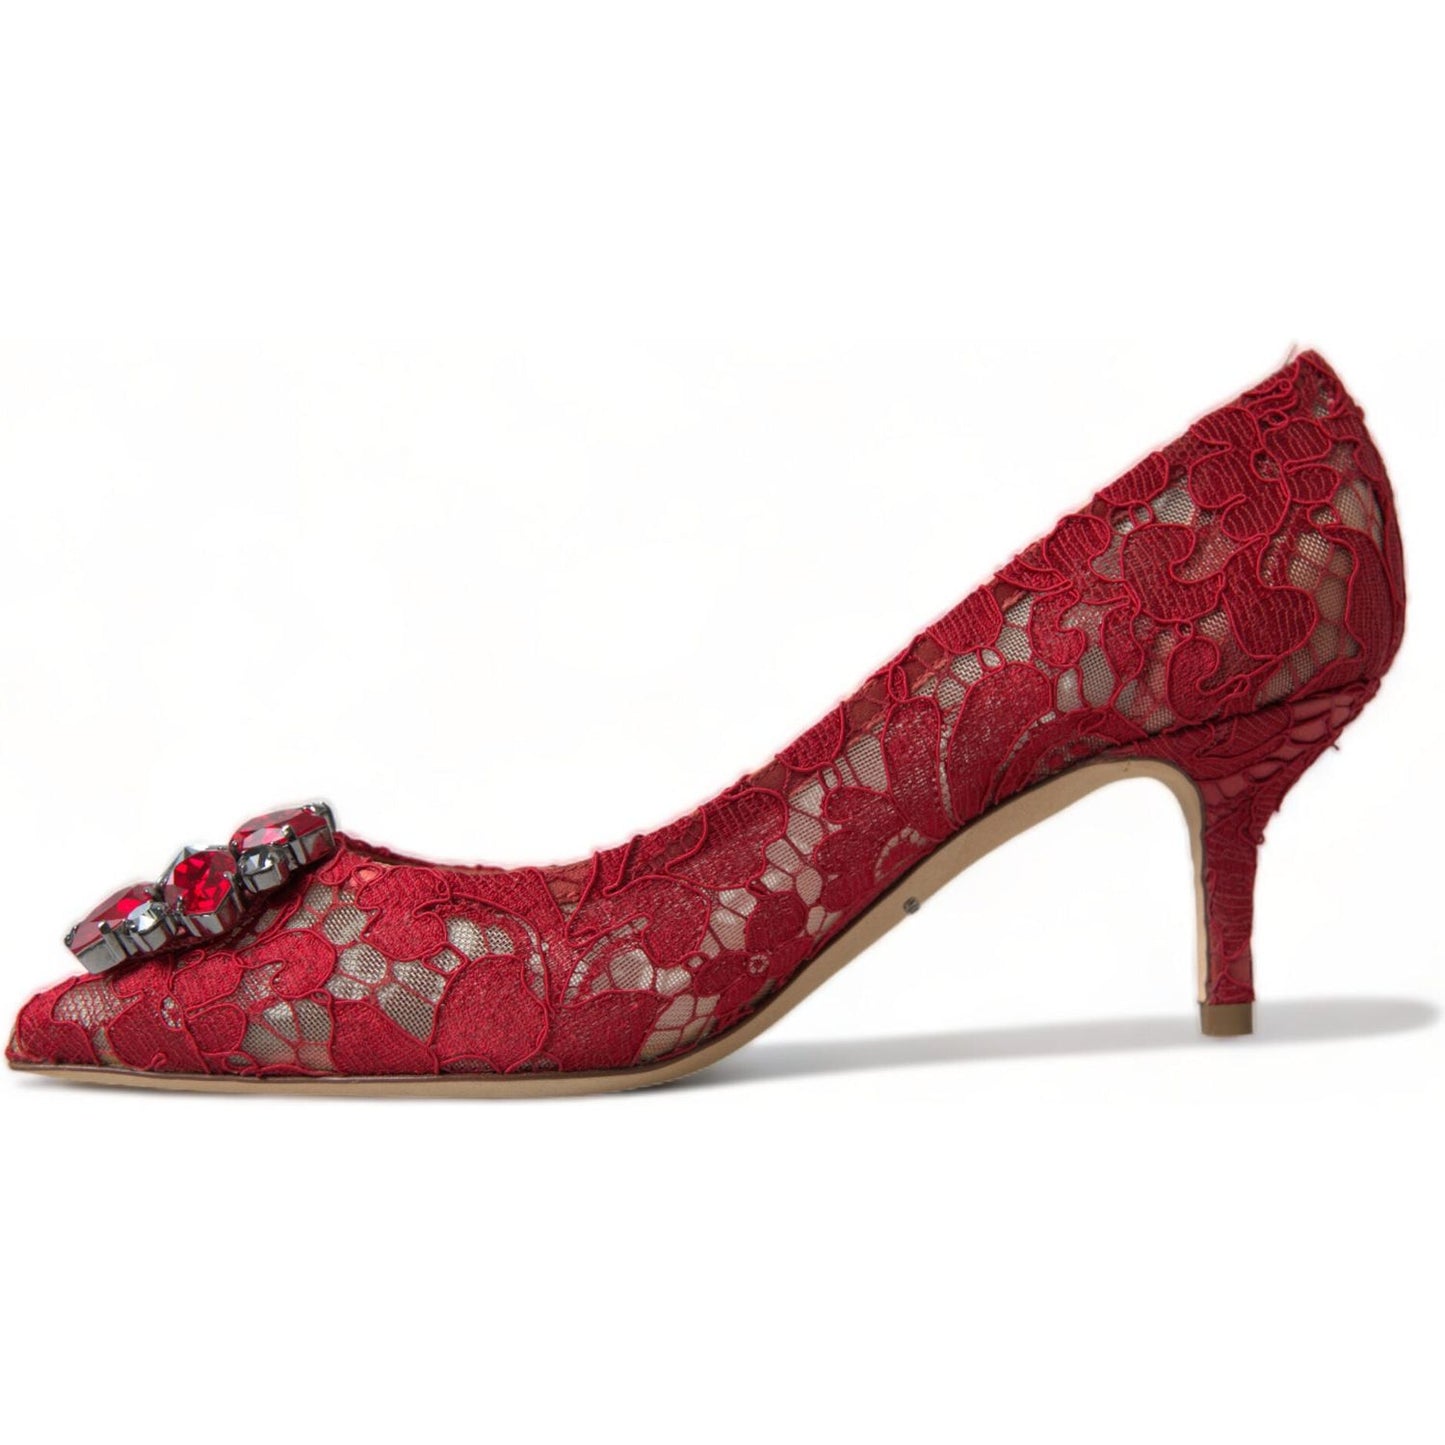 Dolce & Gabbana Radiant Red Lace Heels with Crystals red-taormina-lace-crystal-heels-pumps-shoes-2 465A9599-bg-scaled-10041457-ad9.jpg